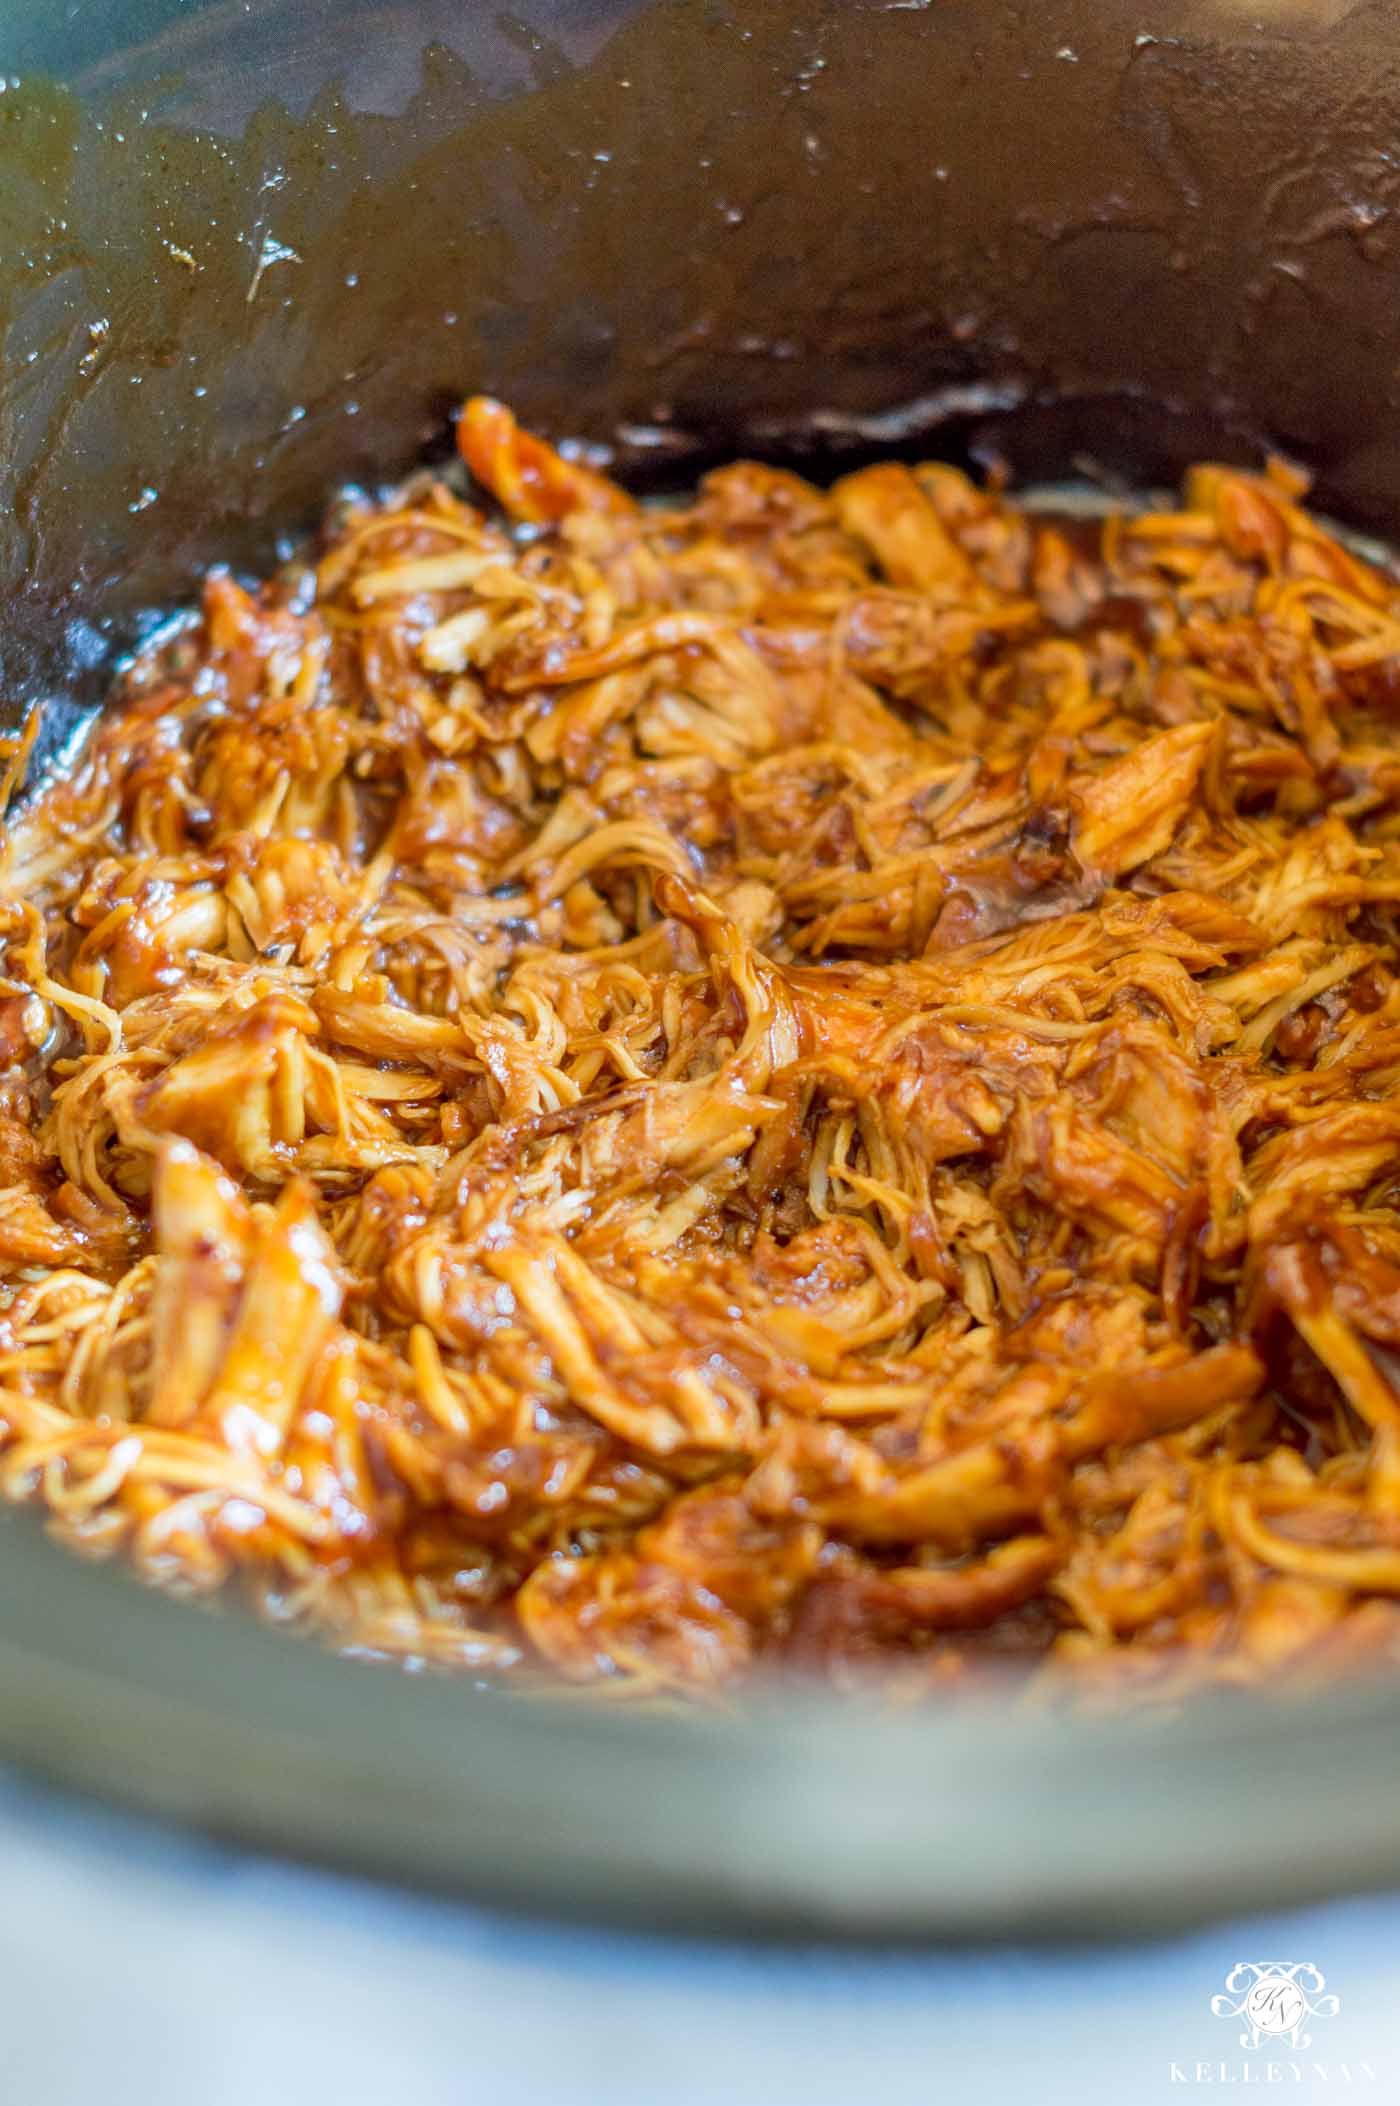 What to Make with Simple Chicken Barbecue Recipe in the Slow Cooker